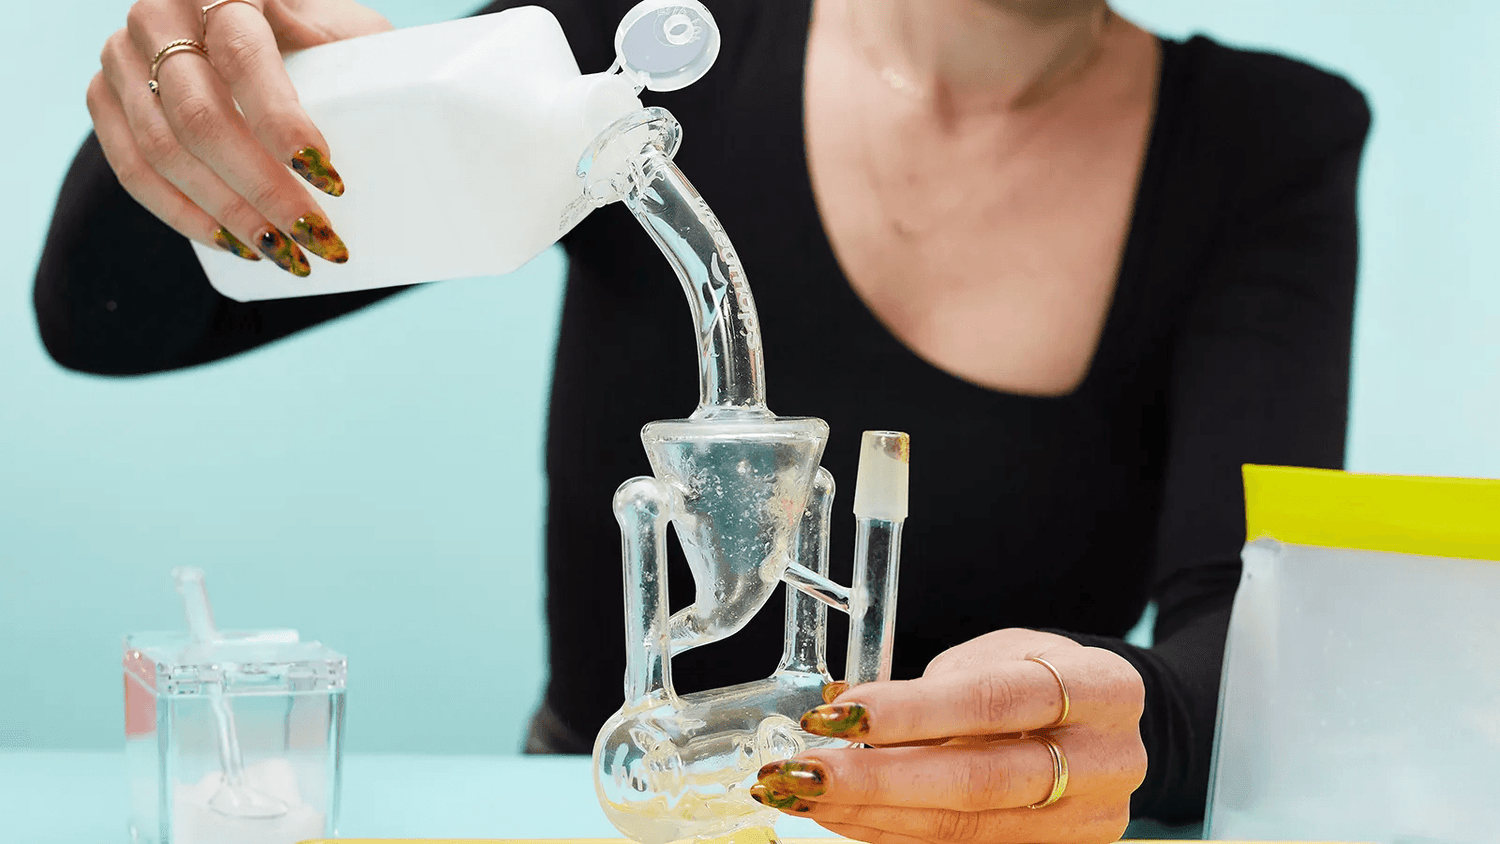 How to Clean a Dab Rig - Puffingmaster